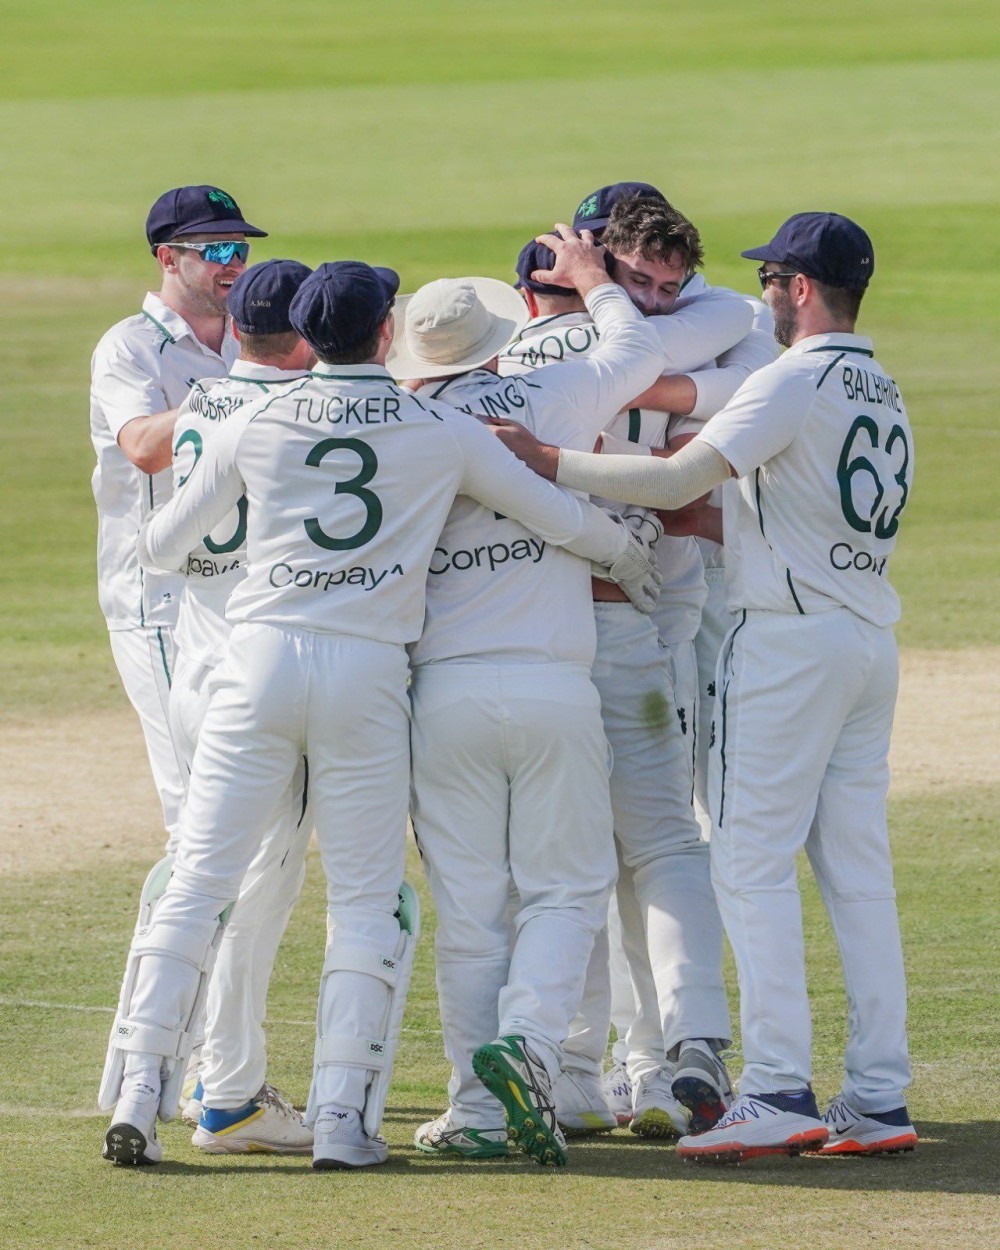 Ireland make history with maiden Test victory over Afghanistan